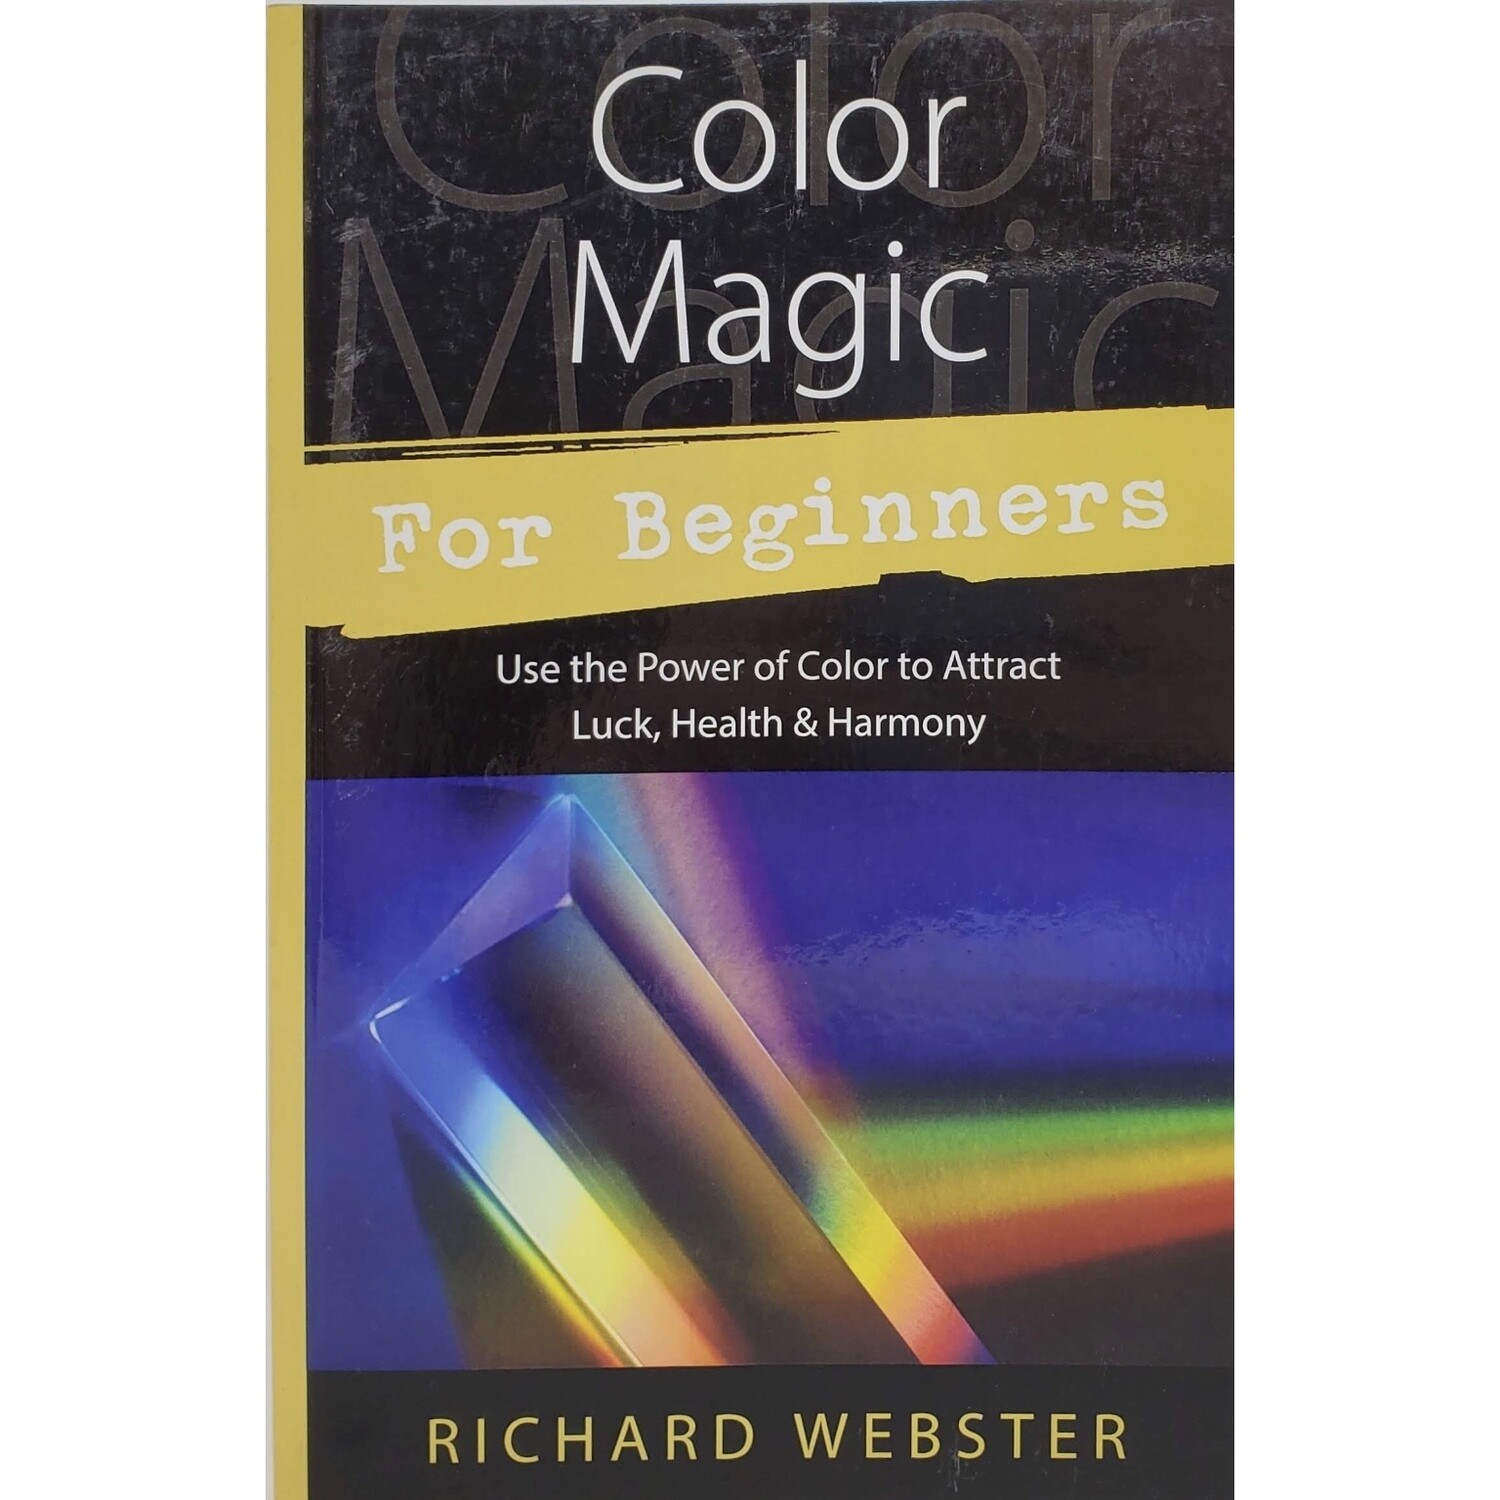 COLOR MAGIC FOR BEGINNERS